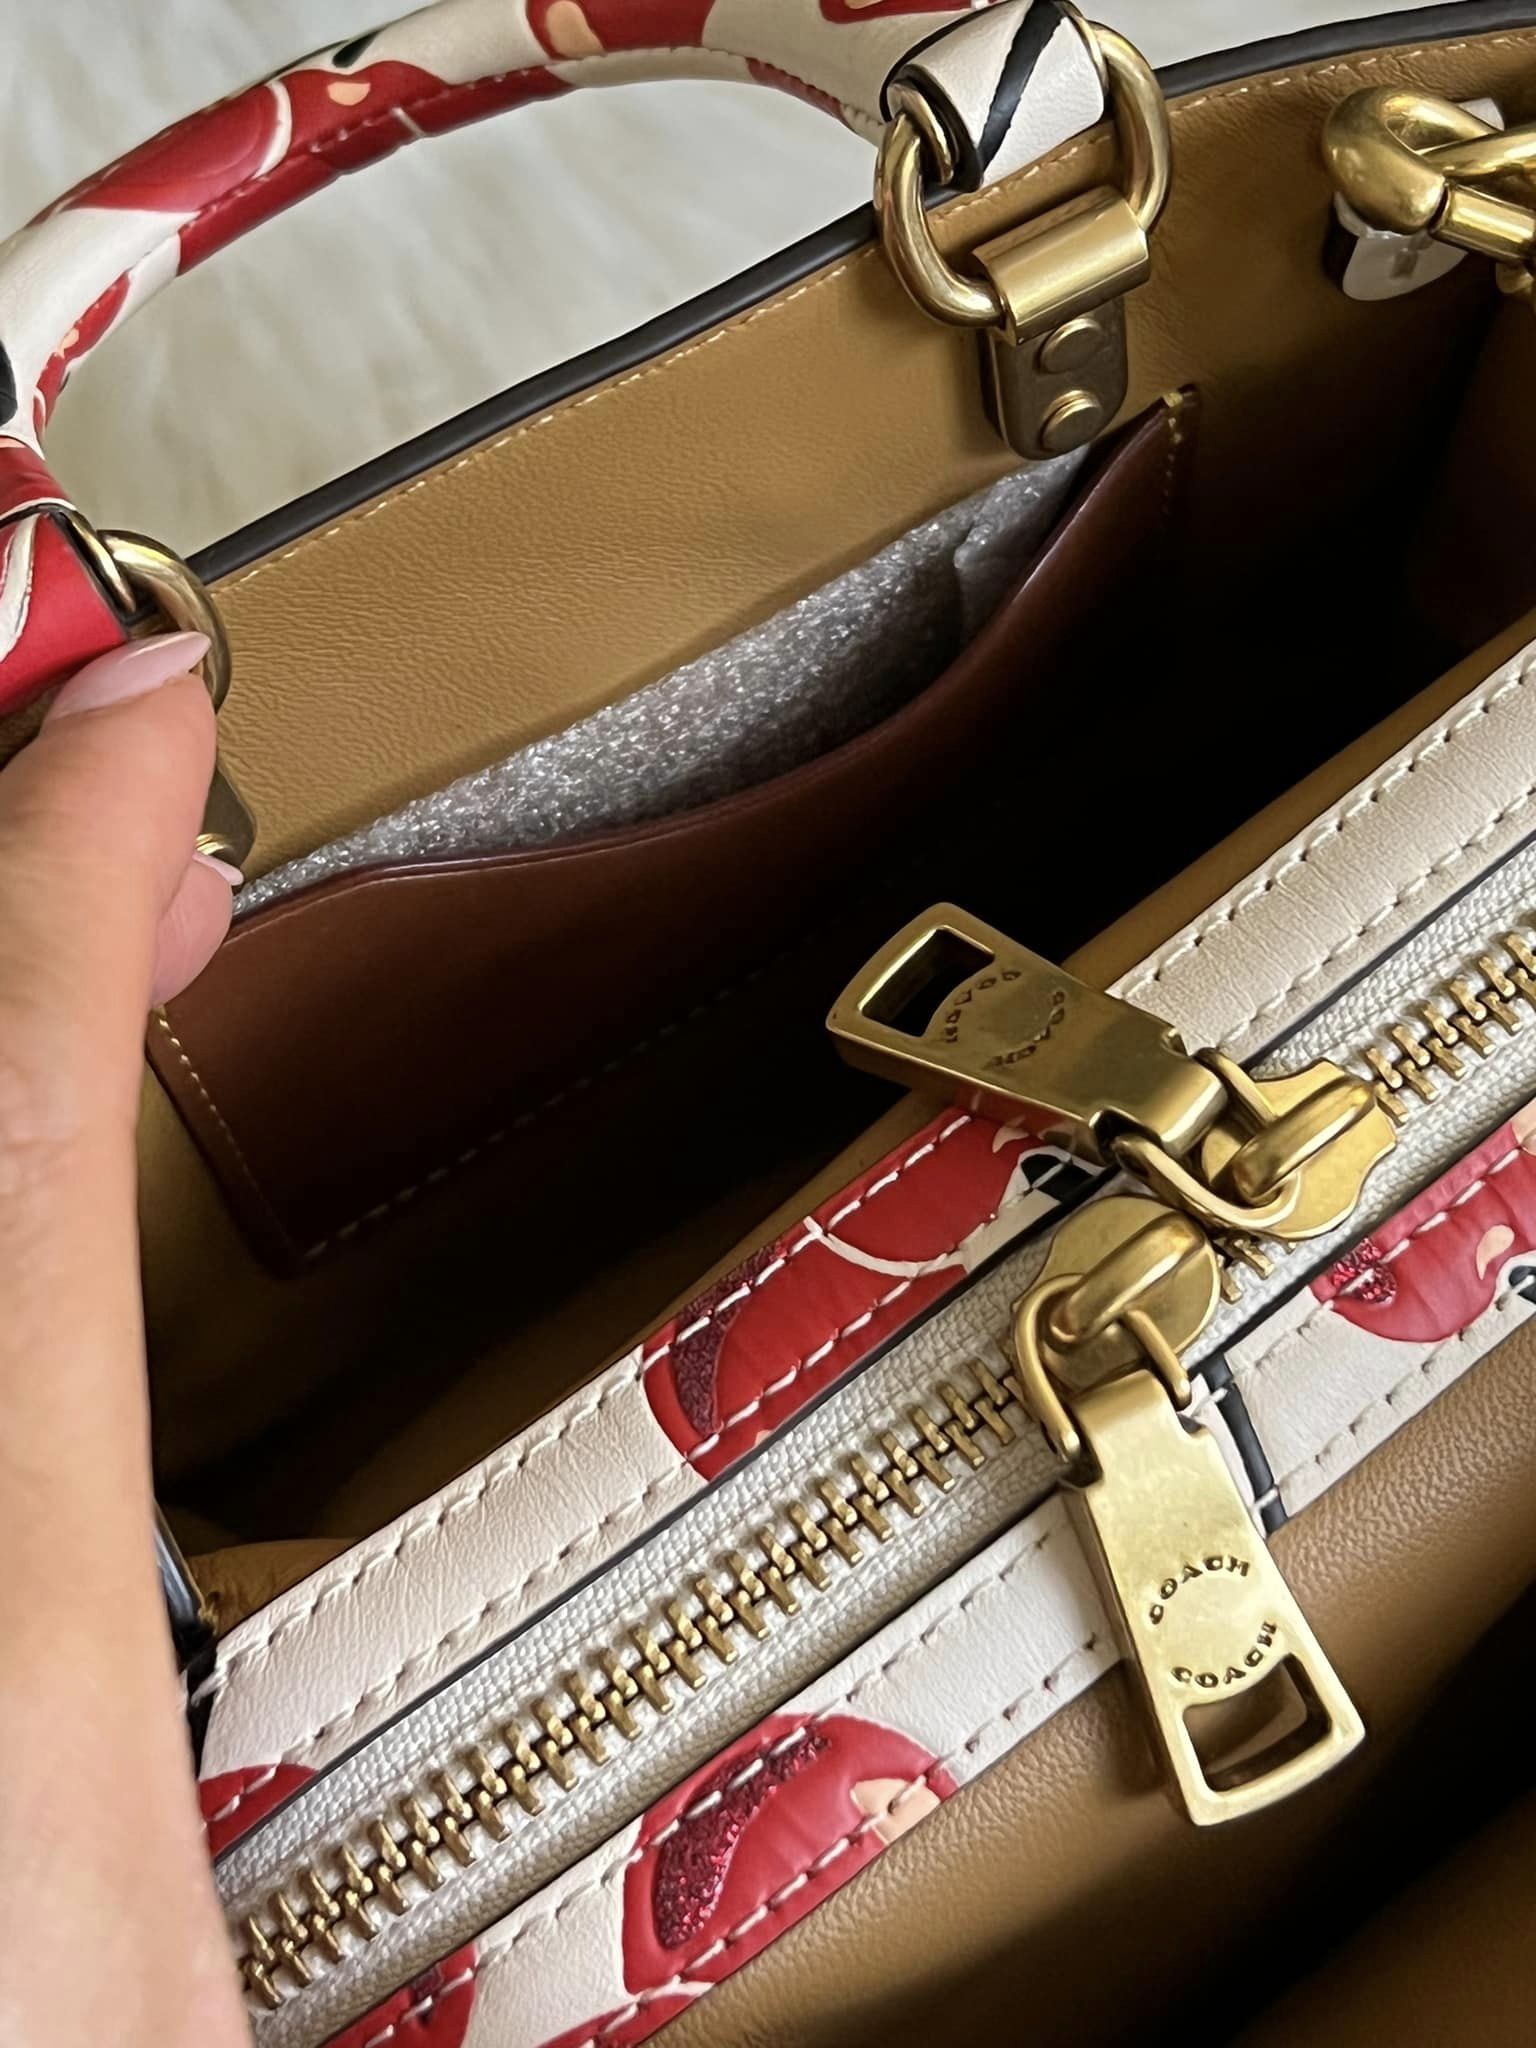 Coach Rogue 17 With Cherry Print Chalk/Multicolor